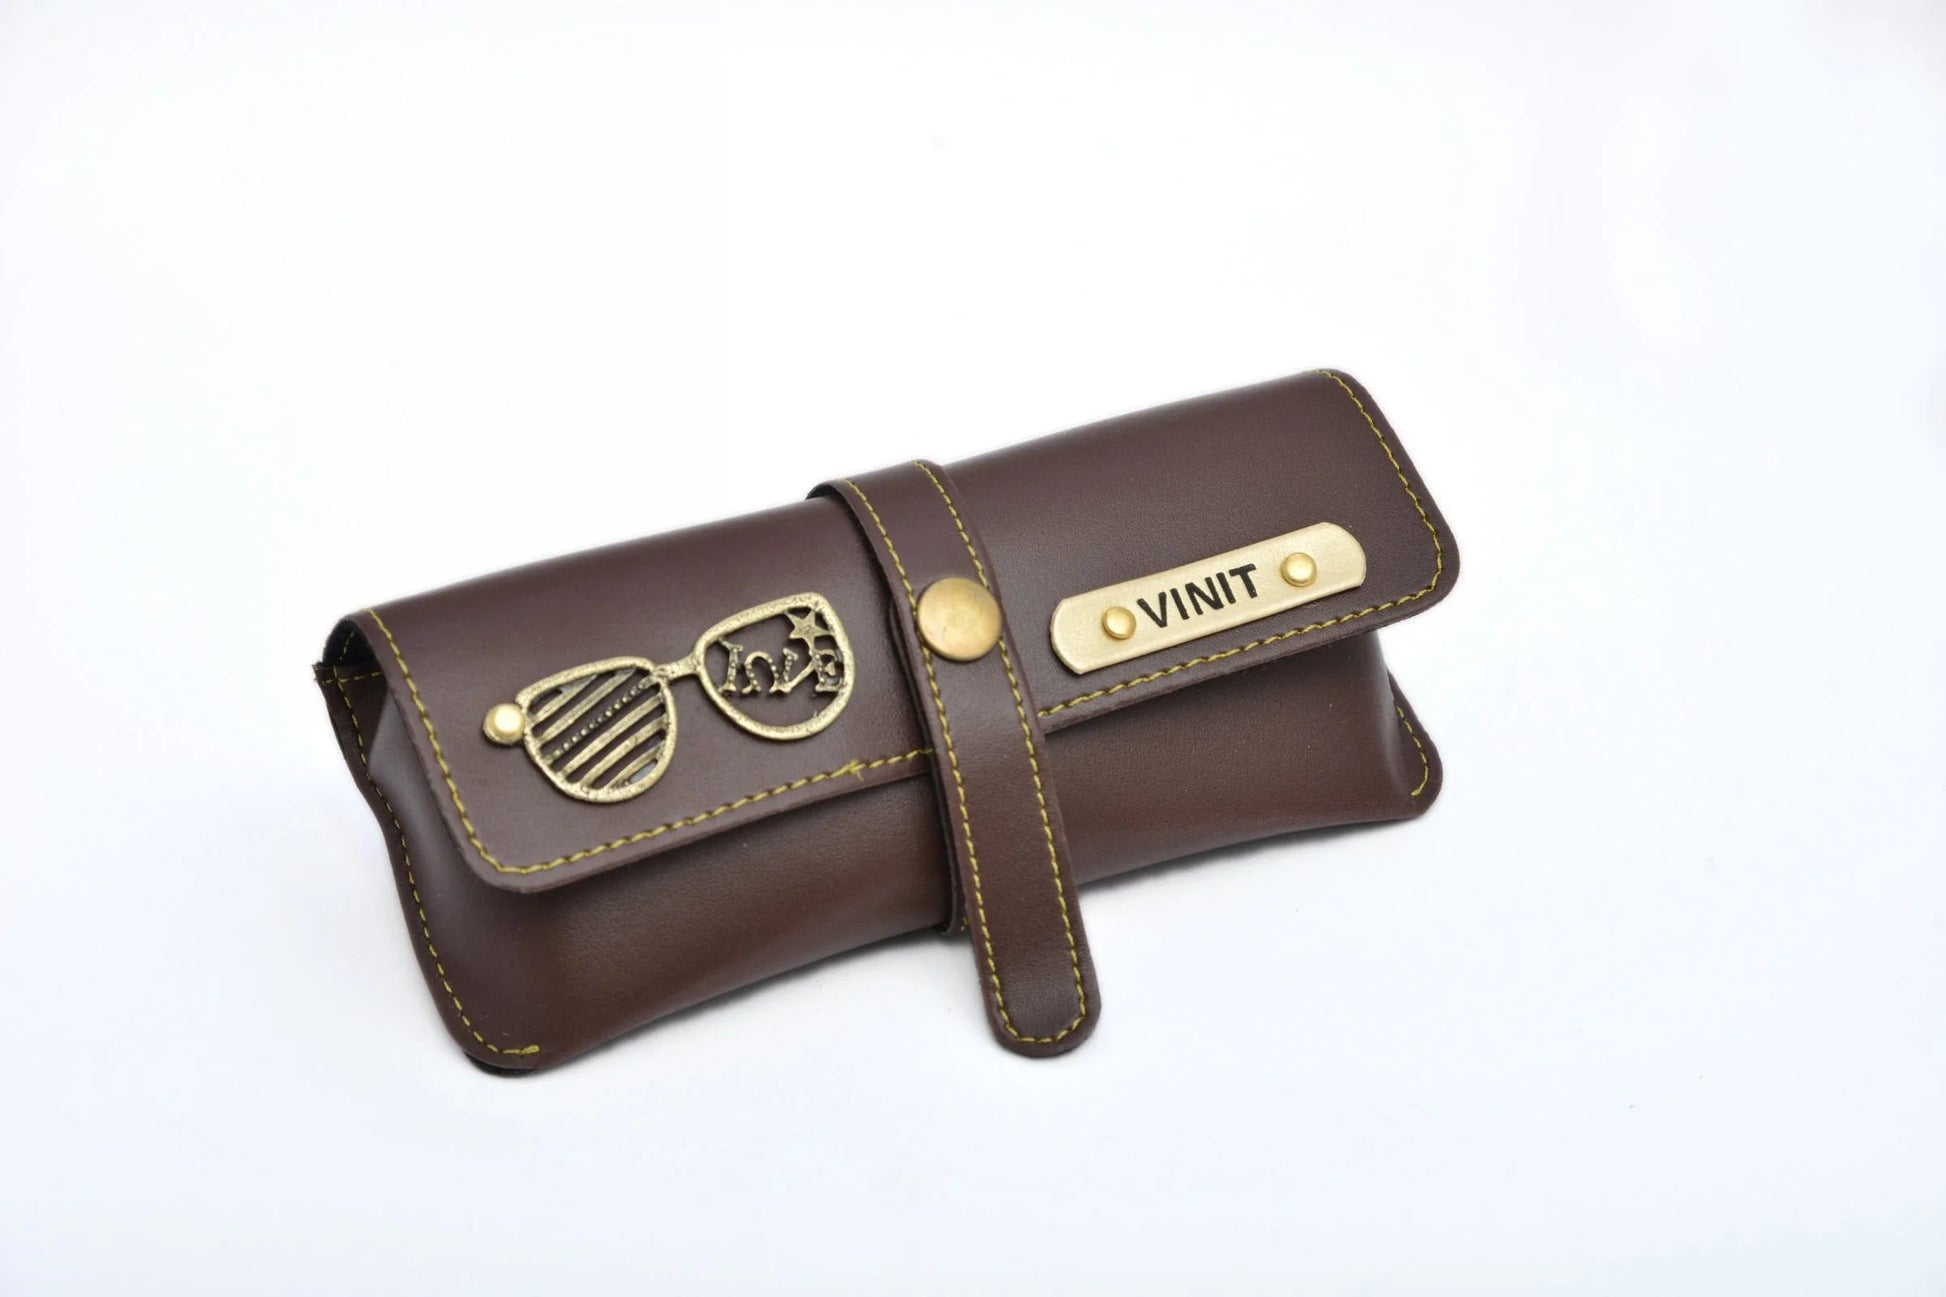 With its compact design and stylish exterior, our eyewear case is a must-have for any fashion-conscious individual.